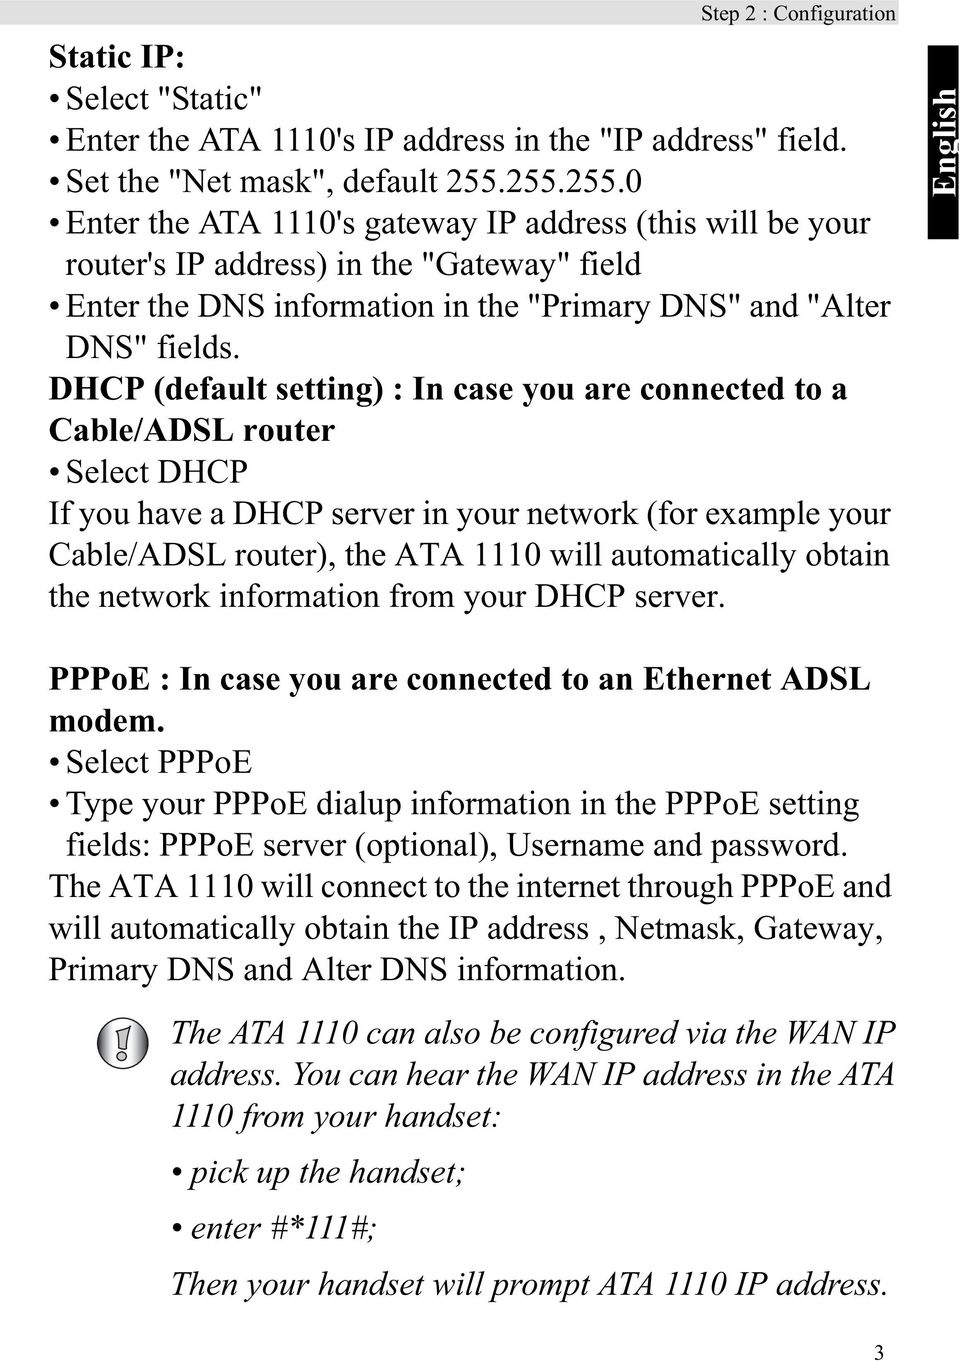 DHCP (default setting) : In case you are connected to a Cable/ADSL router Select DHCP If you have a DHCP server in your network (for example your Cable/ADSL router), the ATA 1110 will automatically